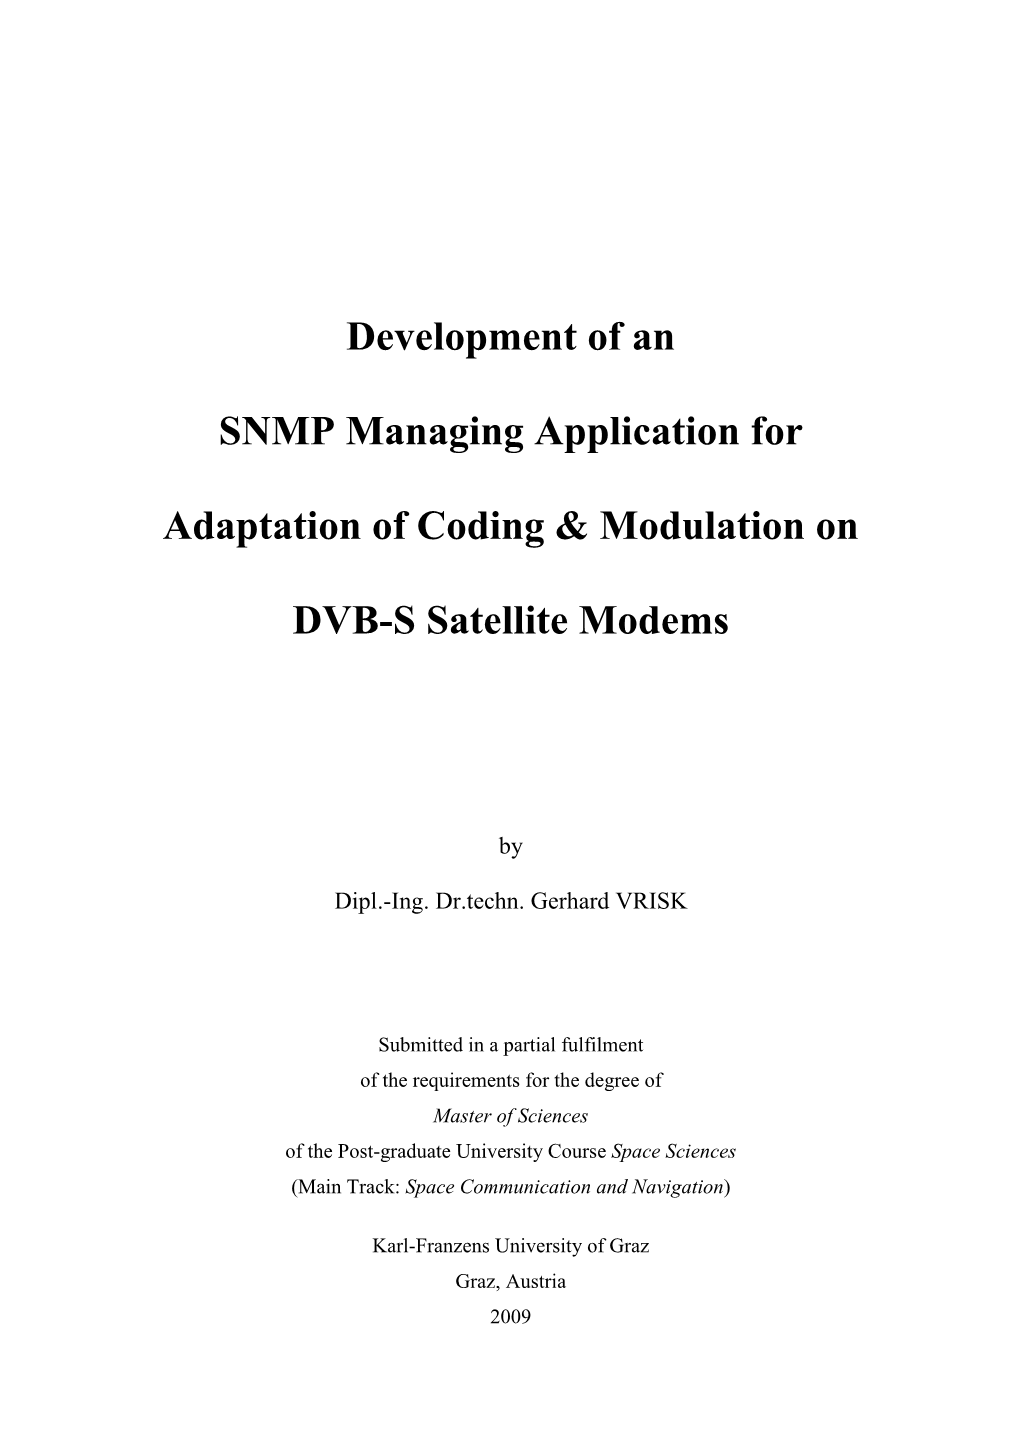 Development of an SNMP Managing Application for Adaptation of Coding & Modulation on DVB-S Satellite Modems Is Structured As Follows